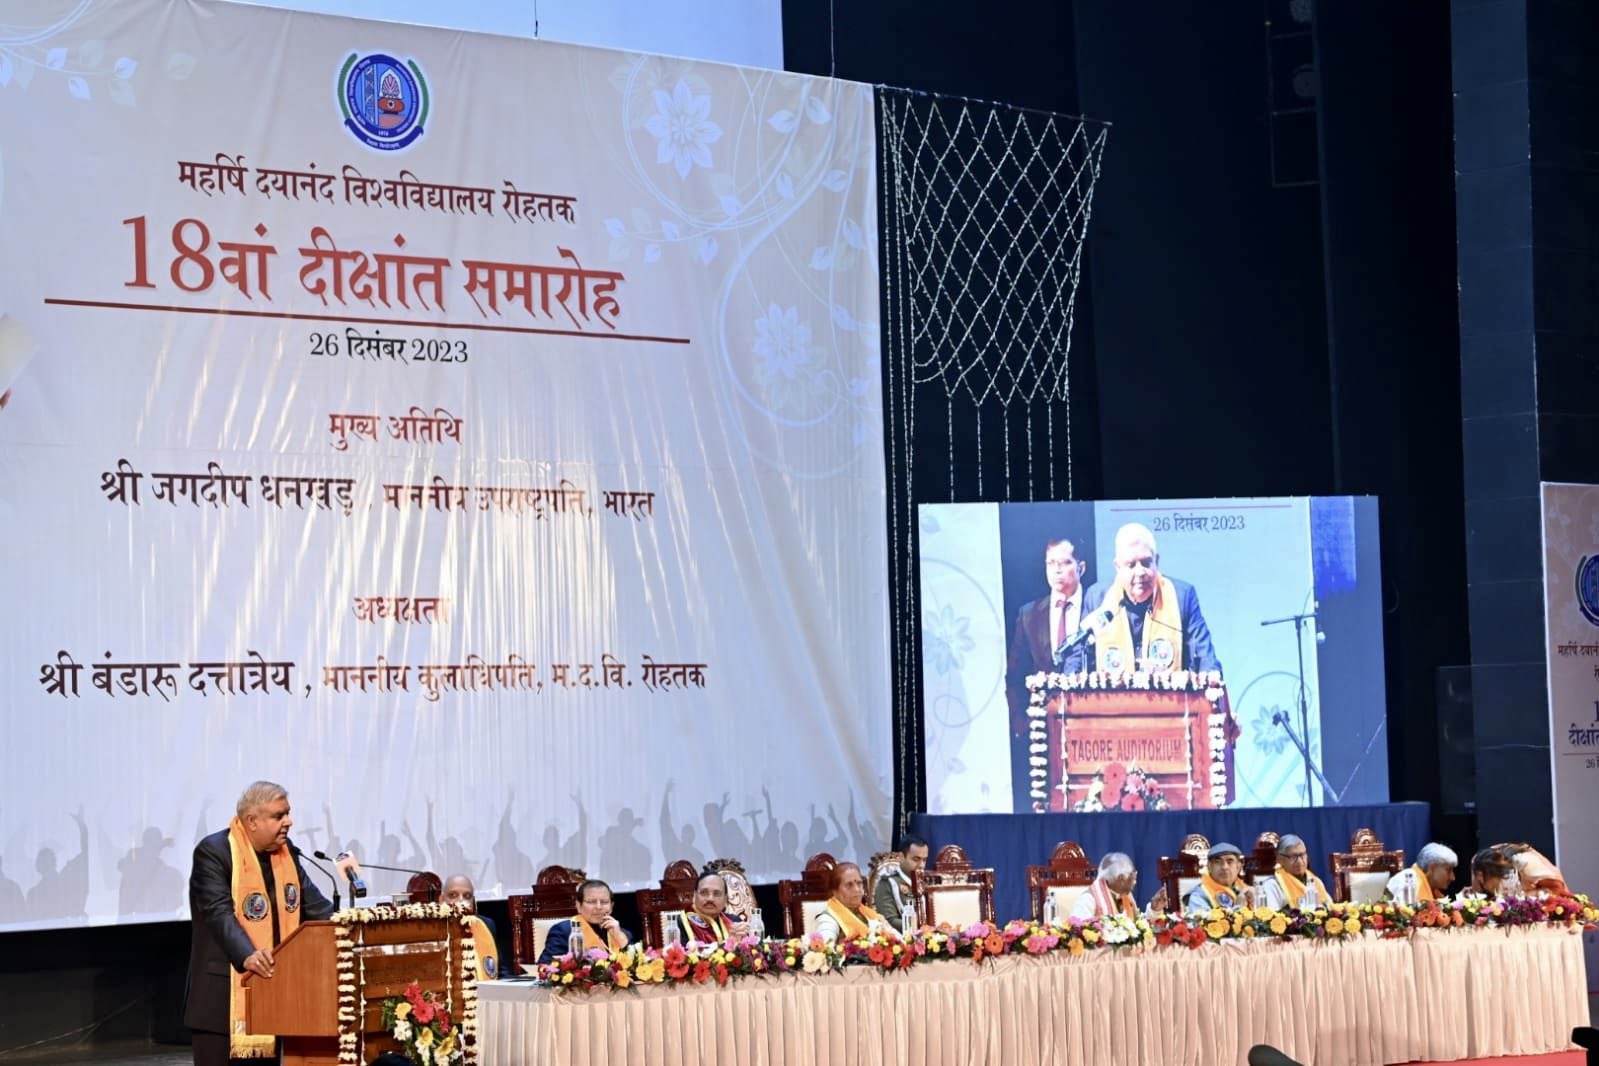 The Vice-President, Shri Jagdeep Dhankhar addressing the 18th convocation ceremony of Maharshi Dayanand University in Rohtak, Haryana on December 26, 2023.